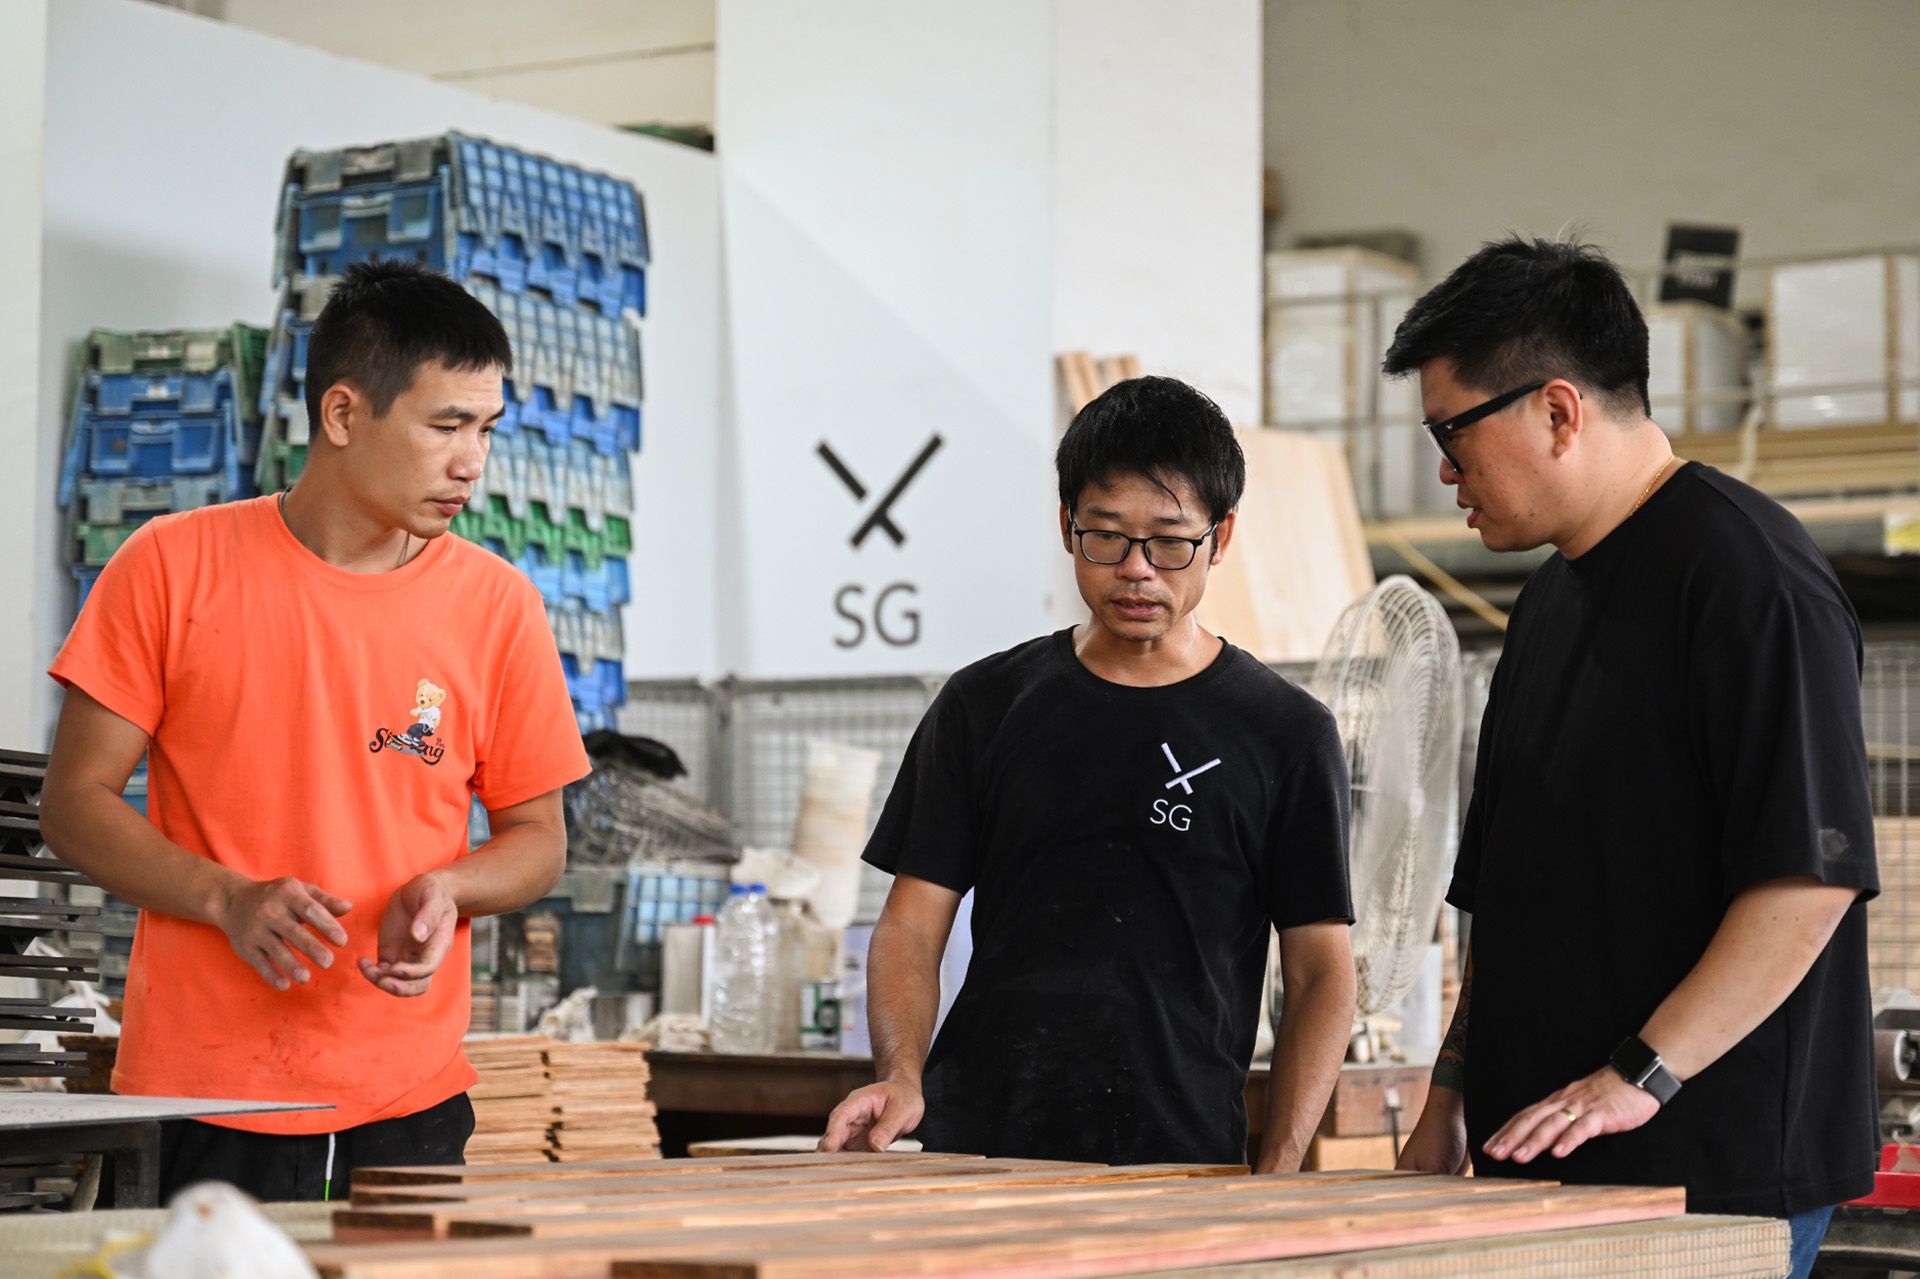 (From right) Mr Justin Lee speaking to his employees Zheng Liangqi and Zhen Huiwu at the ChopValue microfactory.